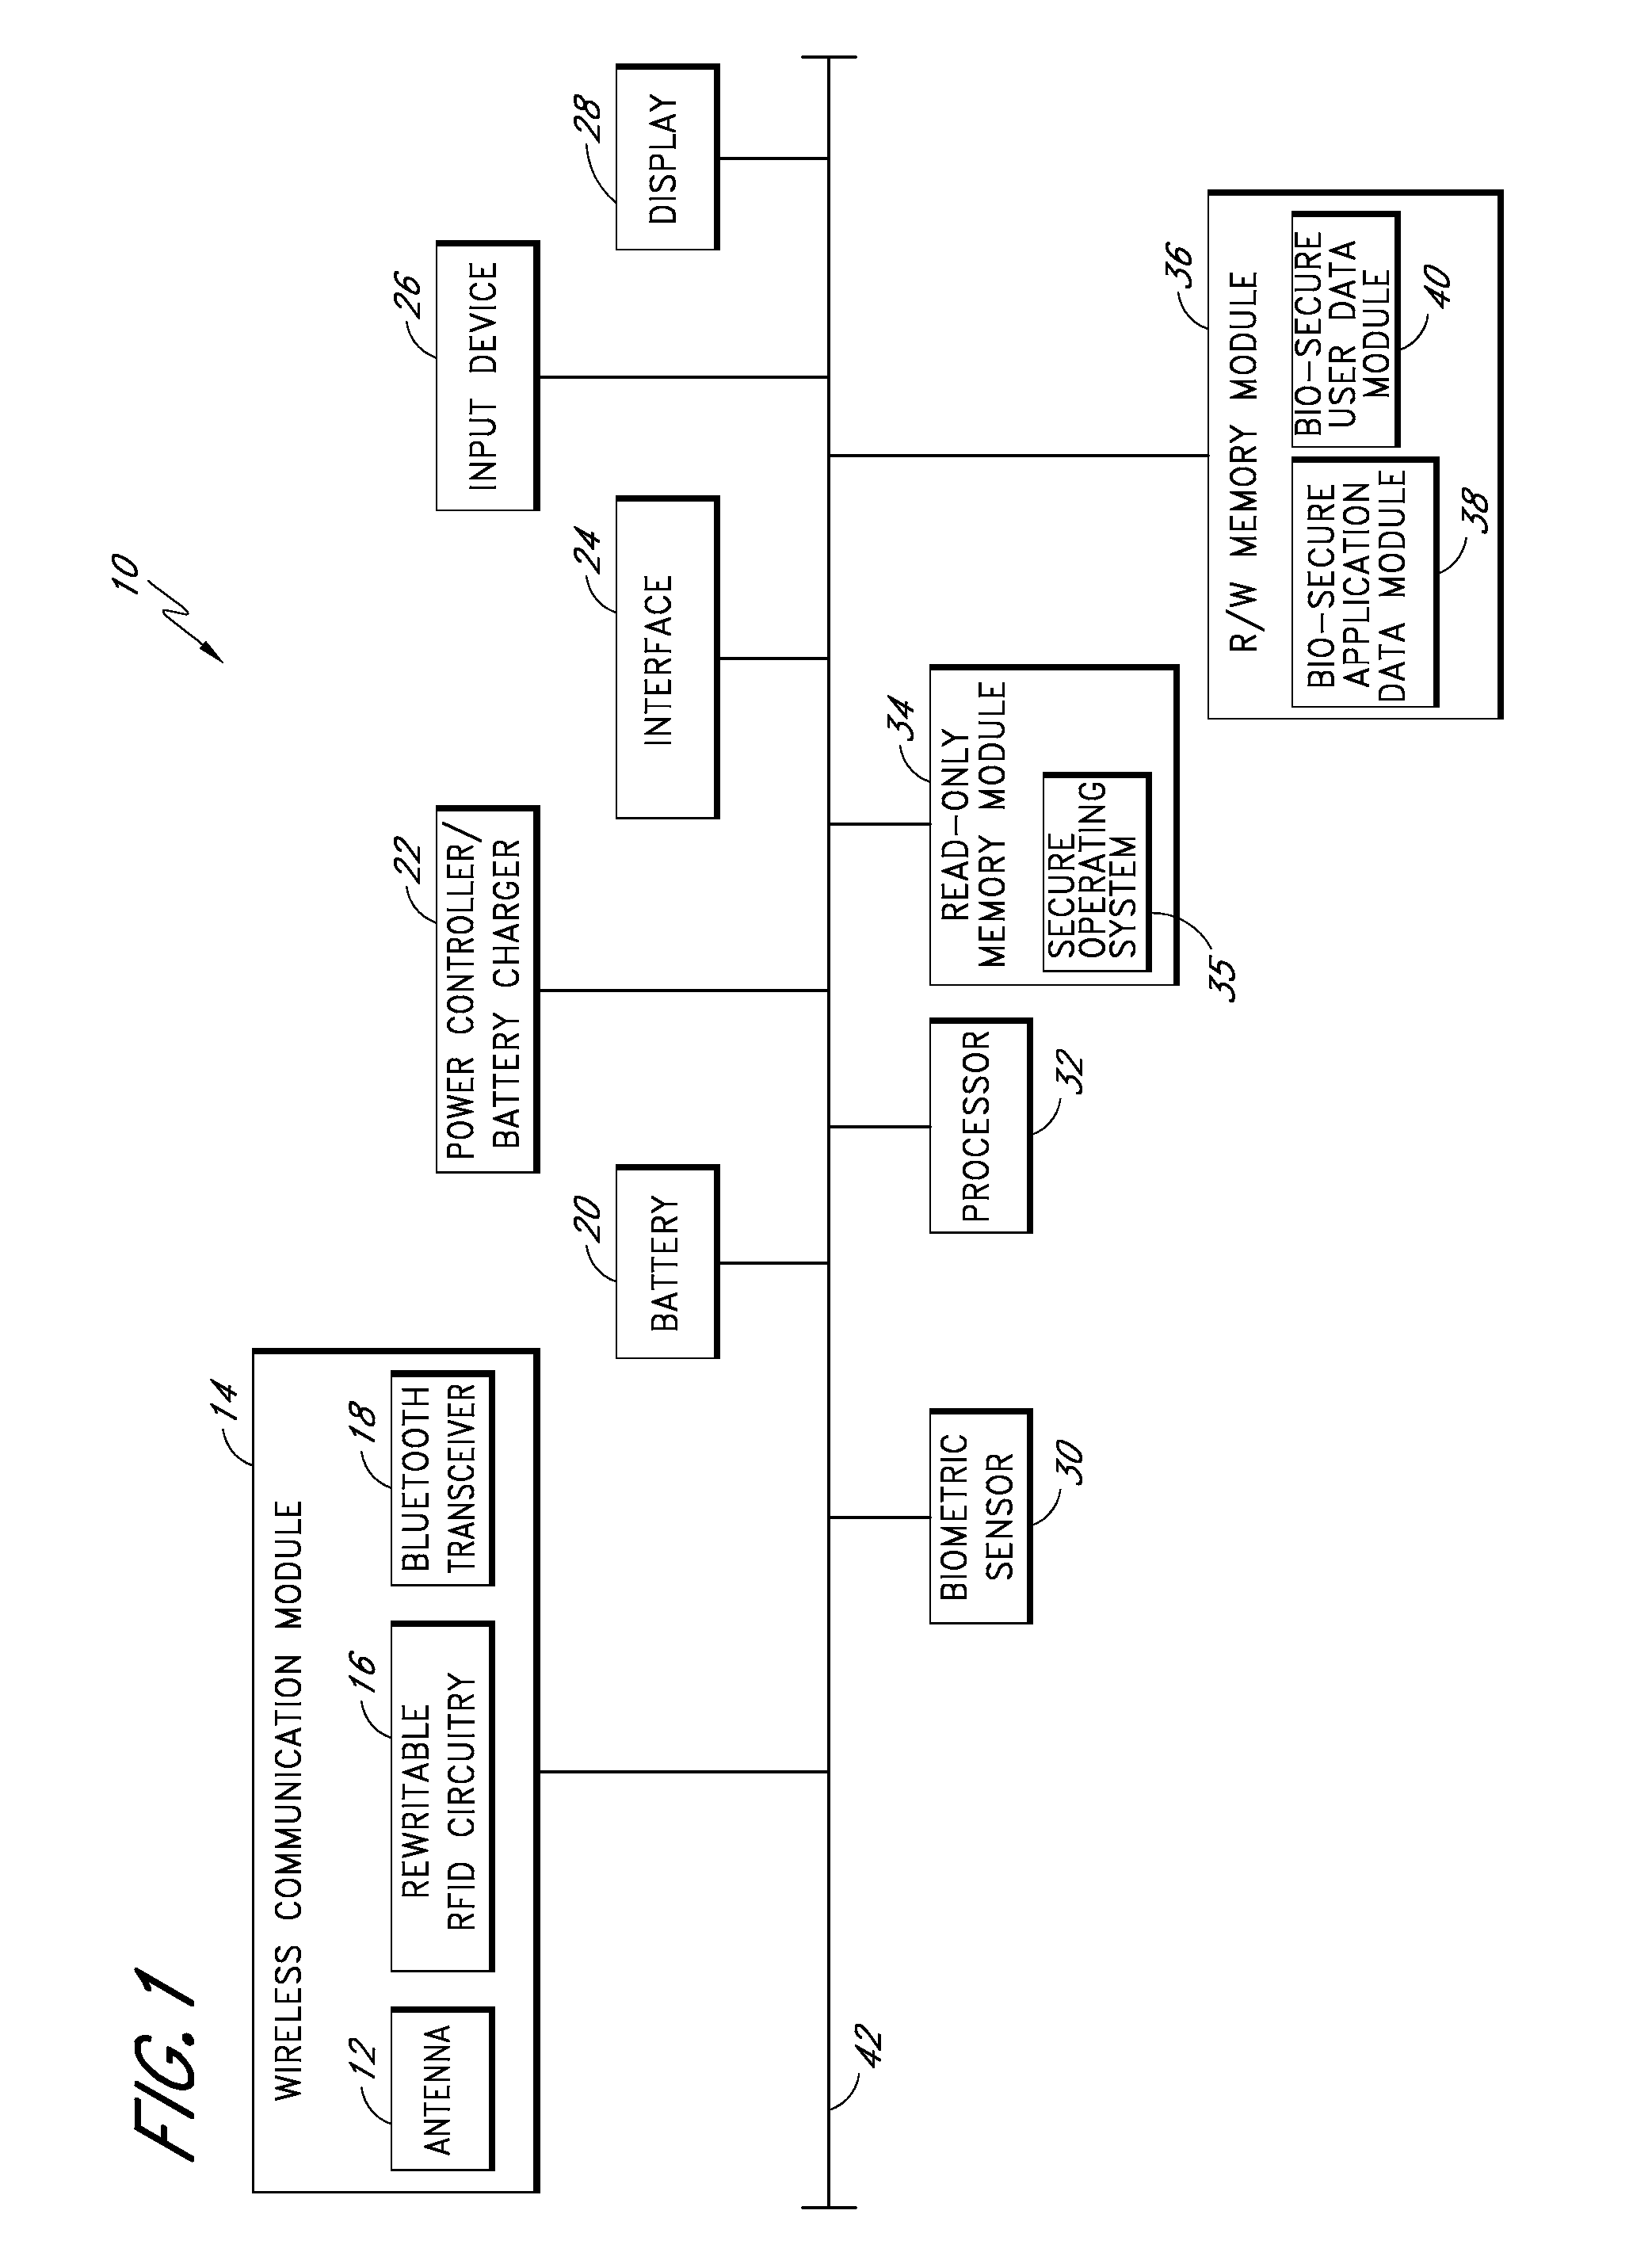 Systems and methods for performing secure network communication